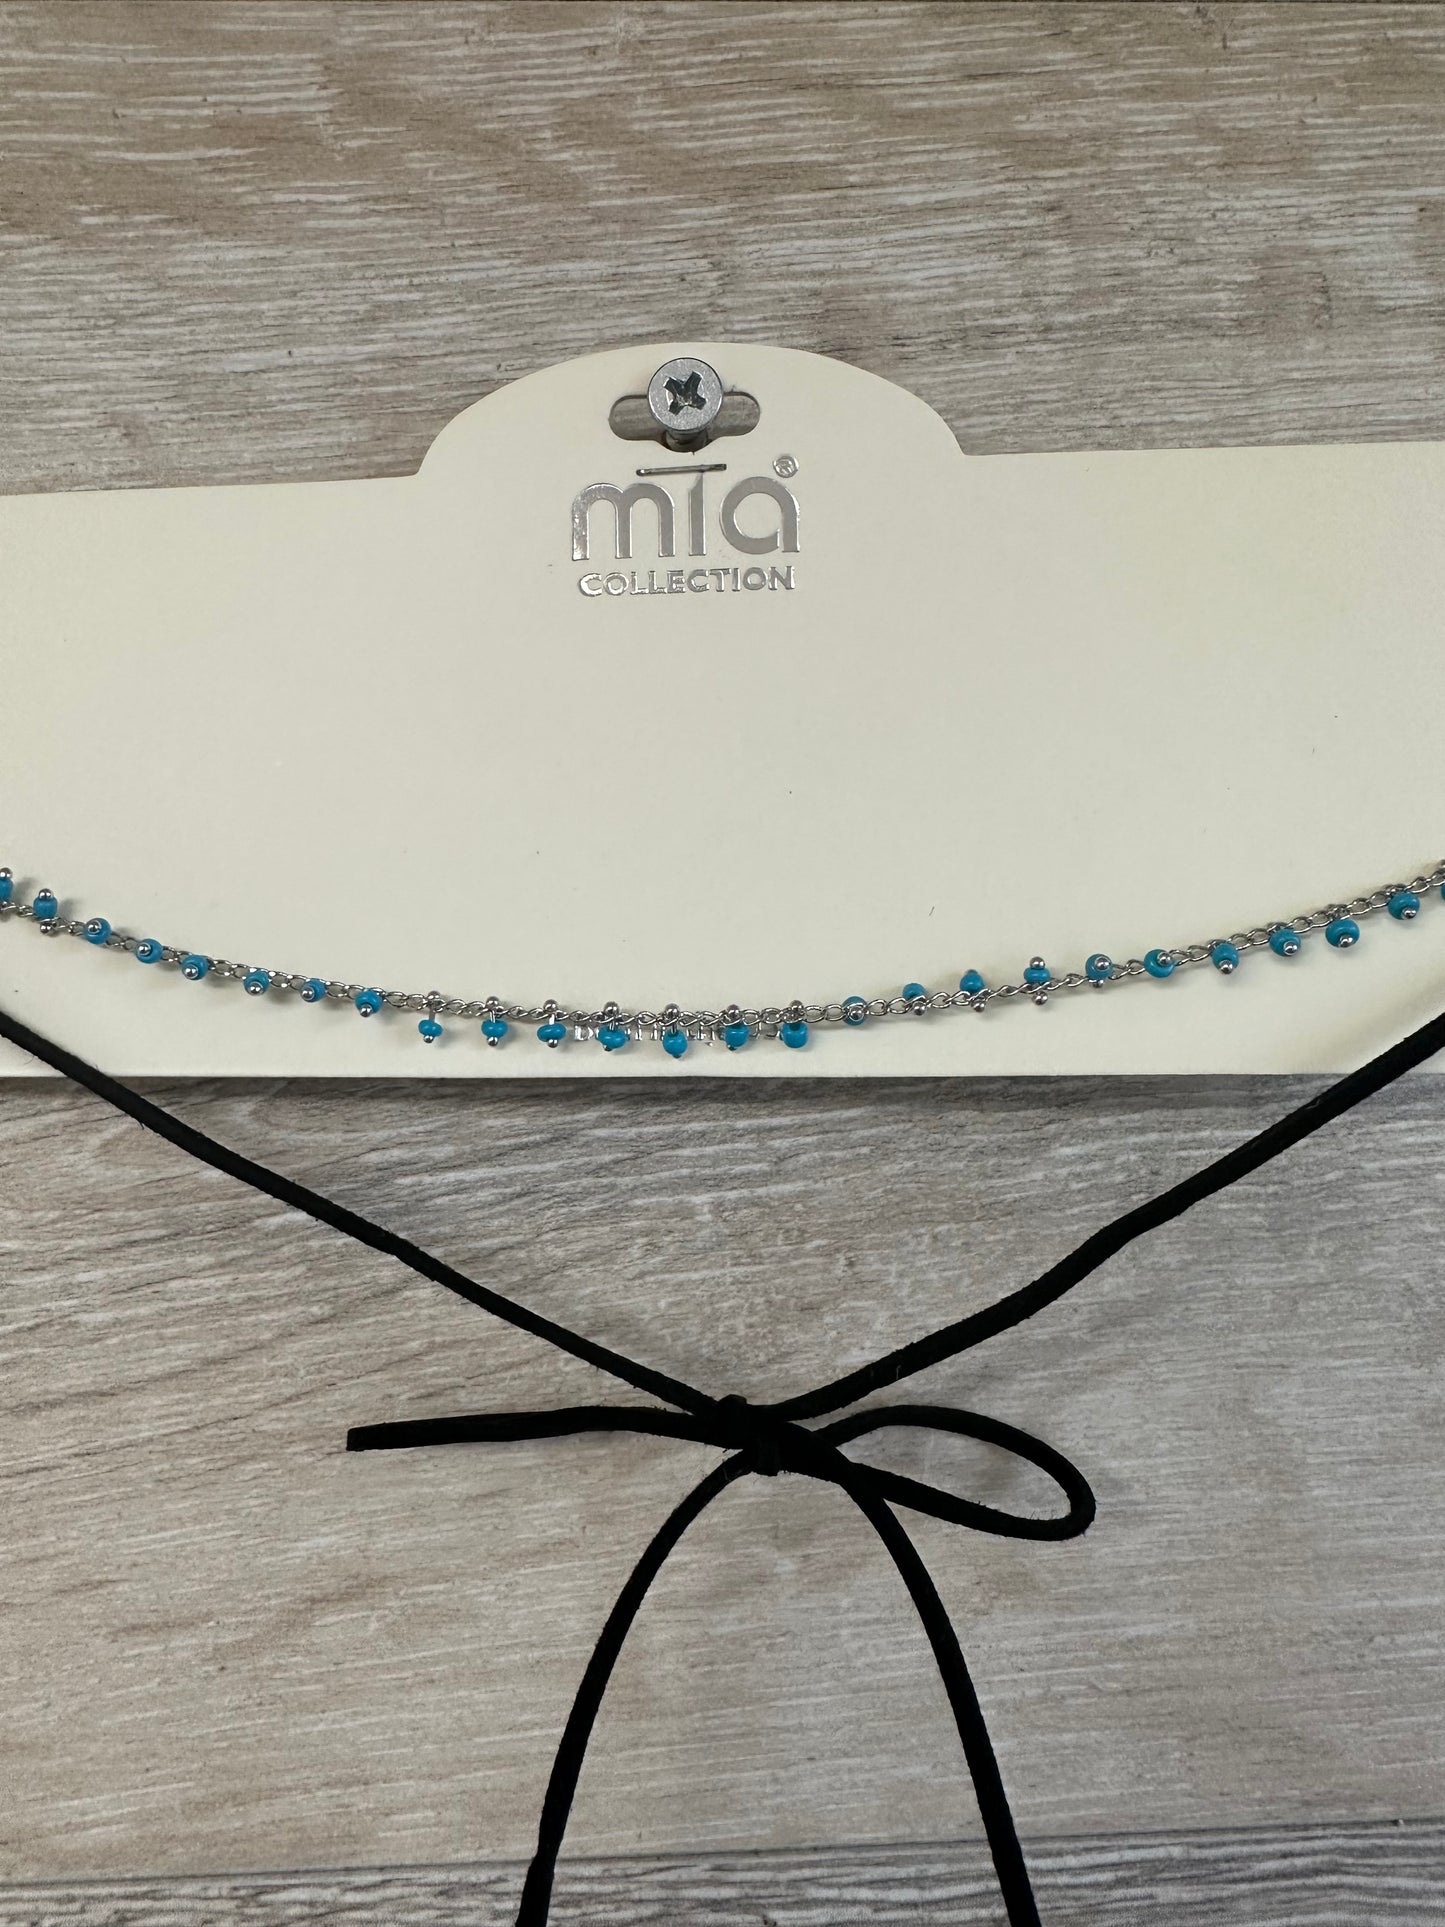 Mia Collection turquoise seed beads on silver choker necklace with black faux leather ties